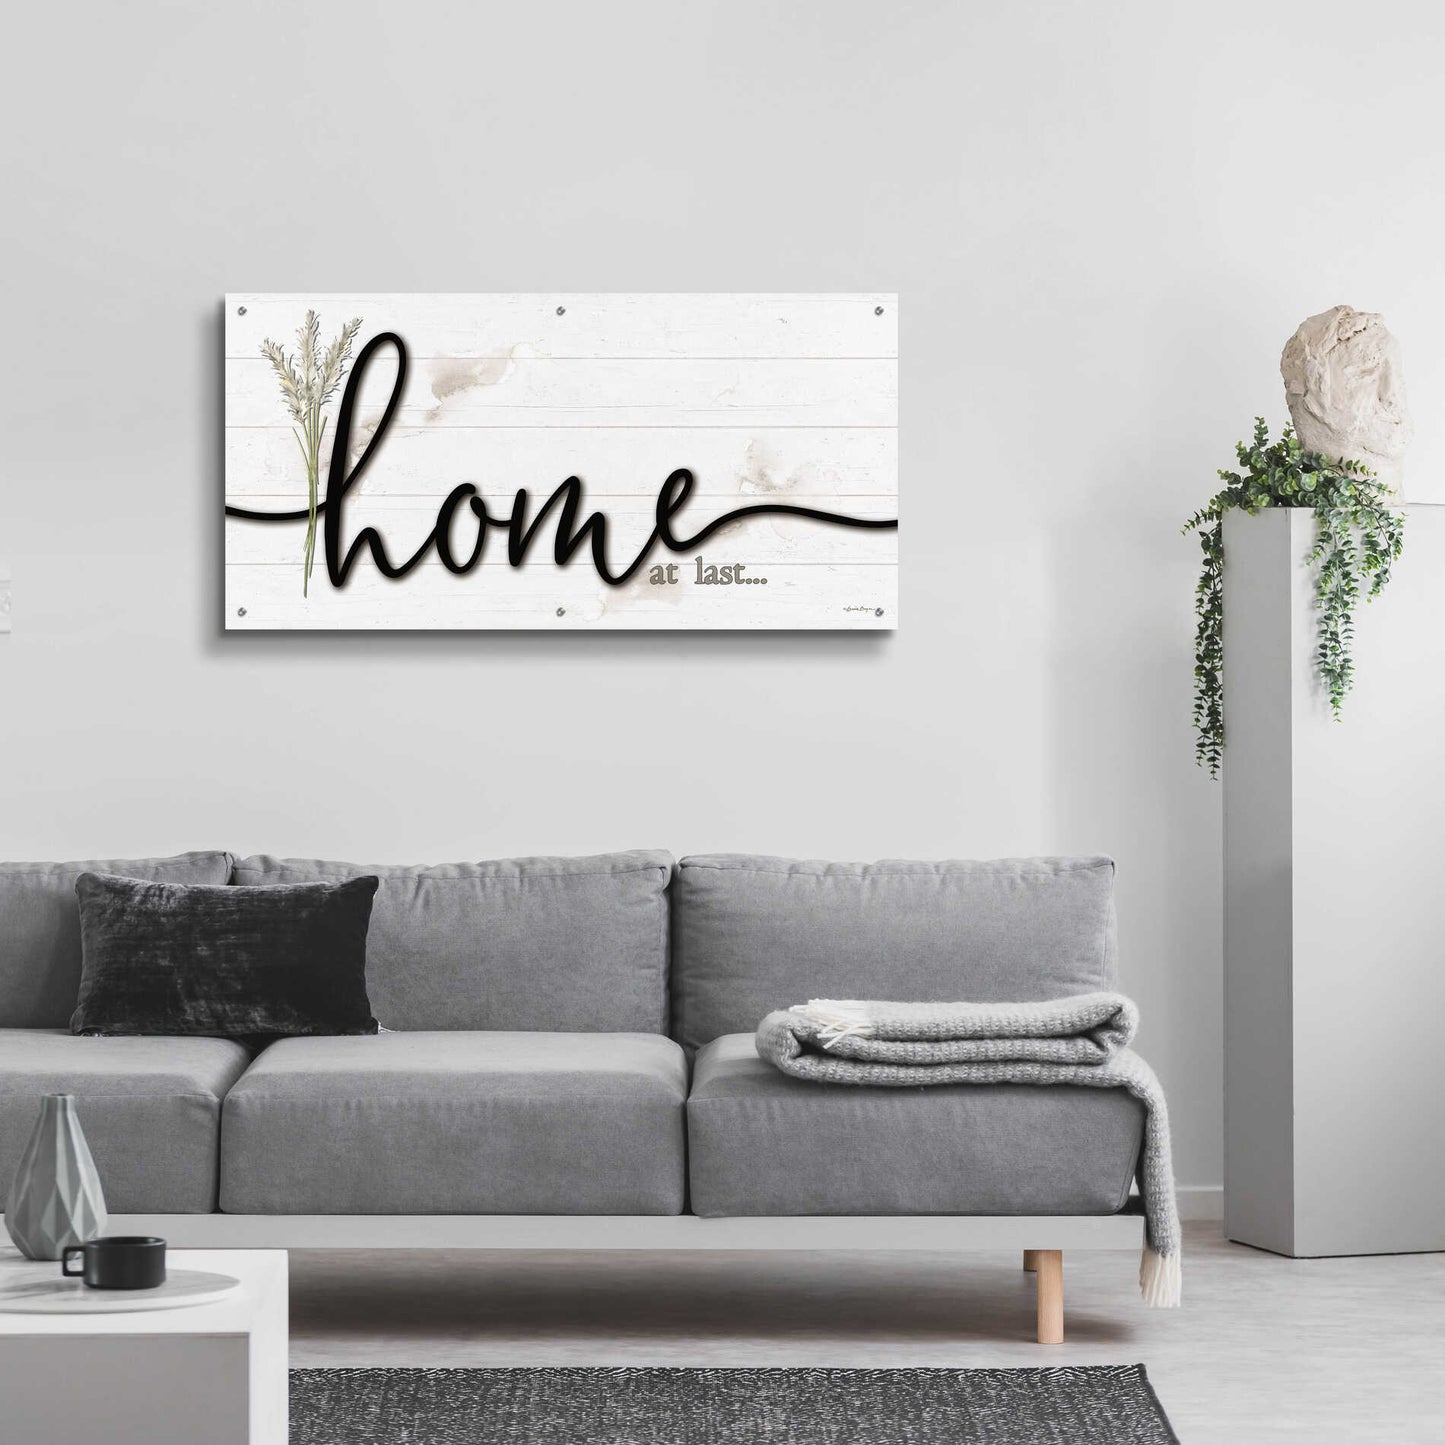 Epic Art 'Home at Last ' by Susie Boyer, Acrylic Glass Wall Art,48x24